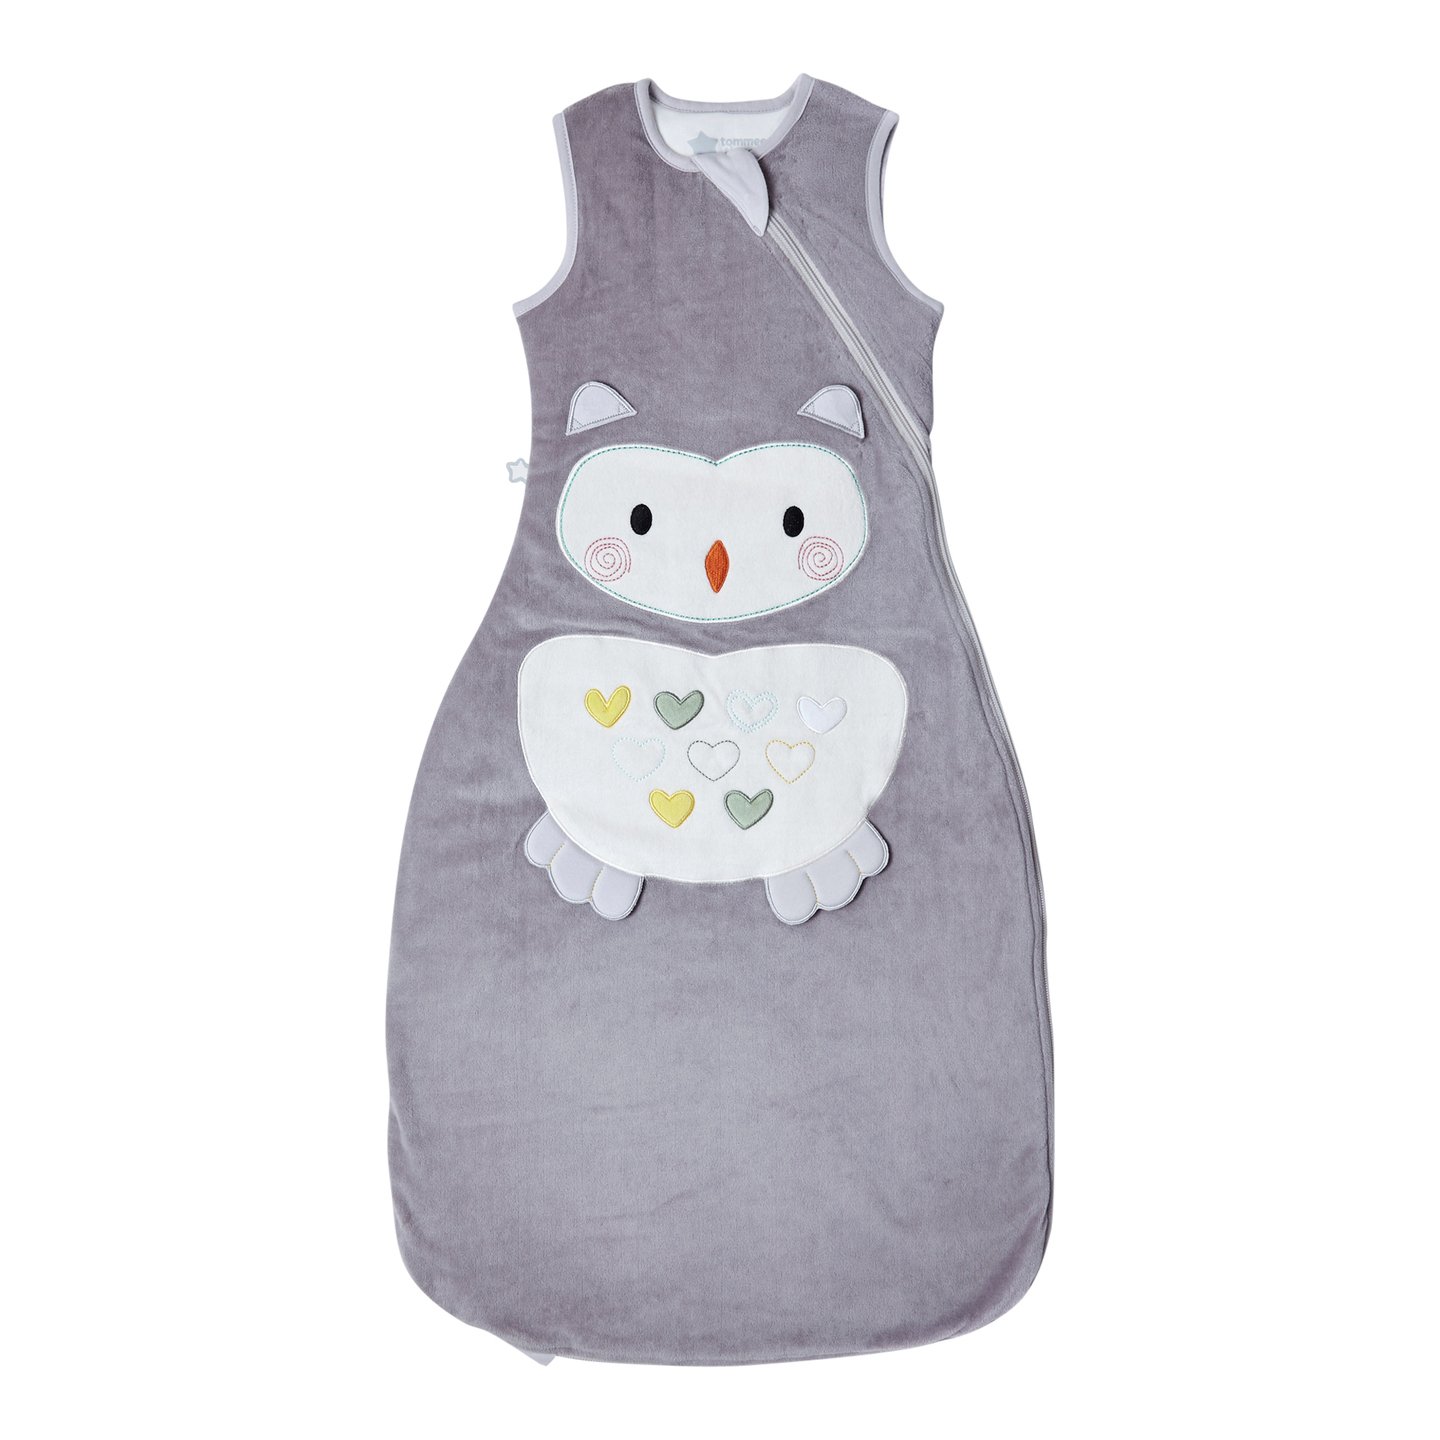 Tommee Tippee Baby Sleep Bag, 6-18m, 2.5 Tog, Ollie the Owl Review